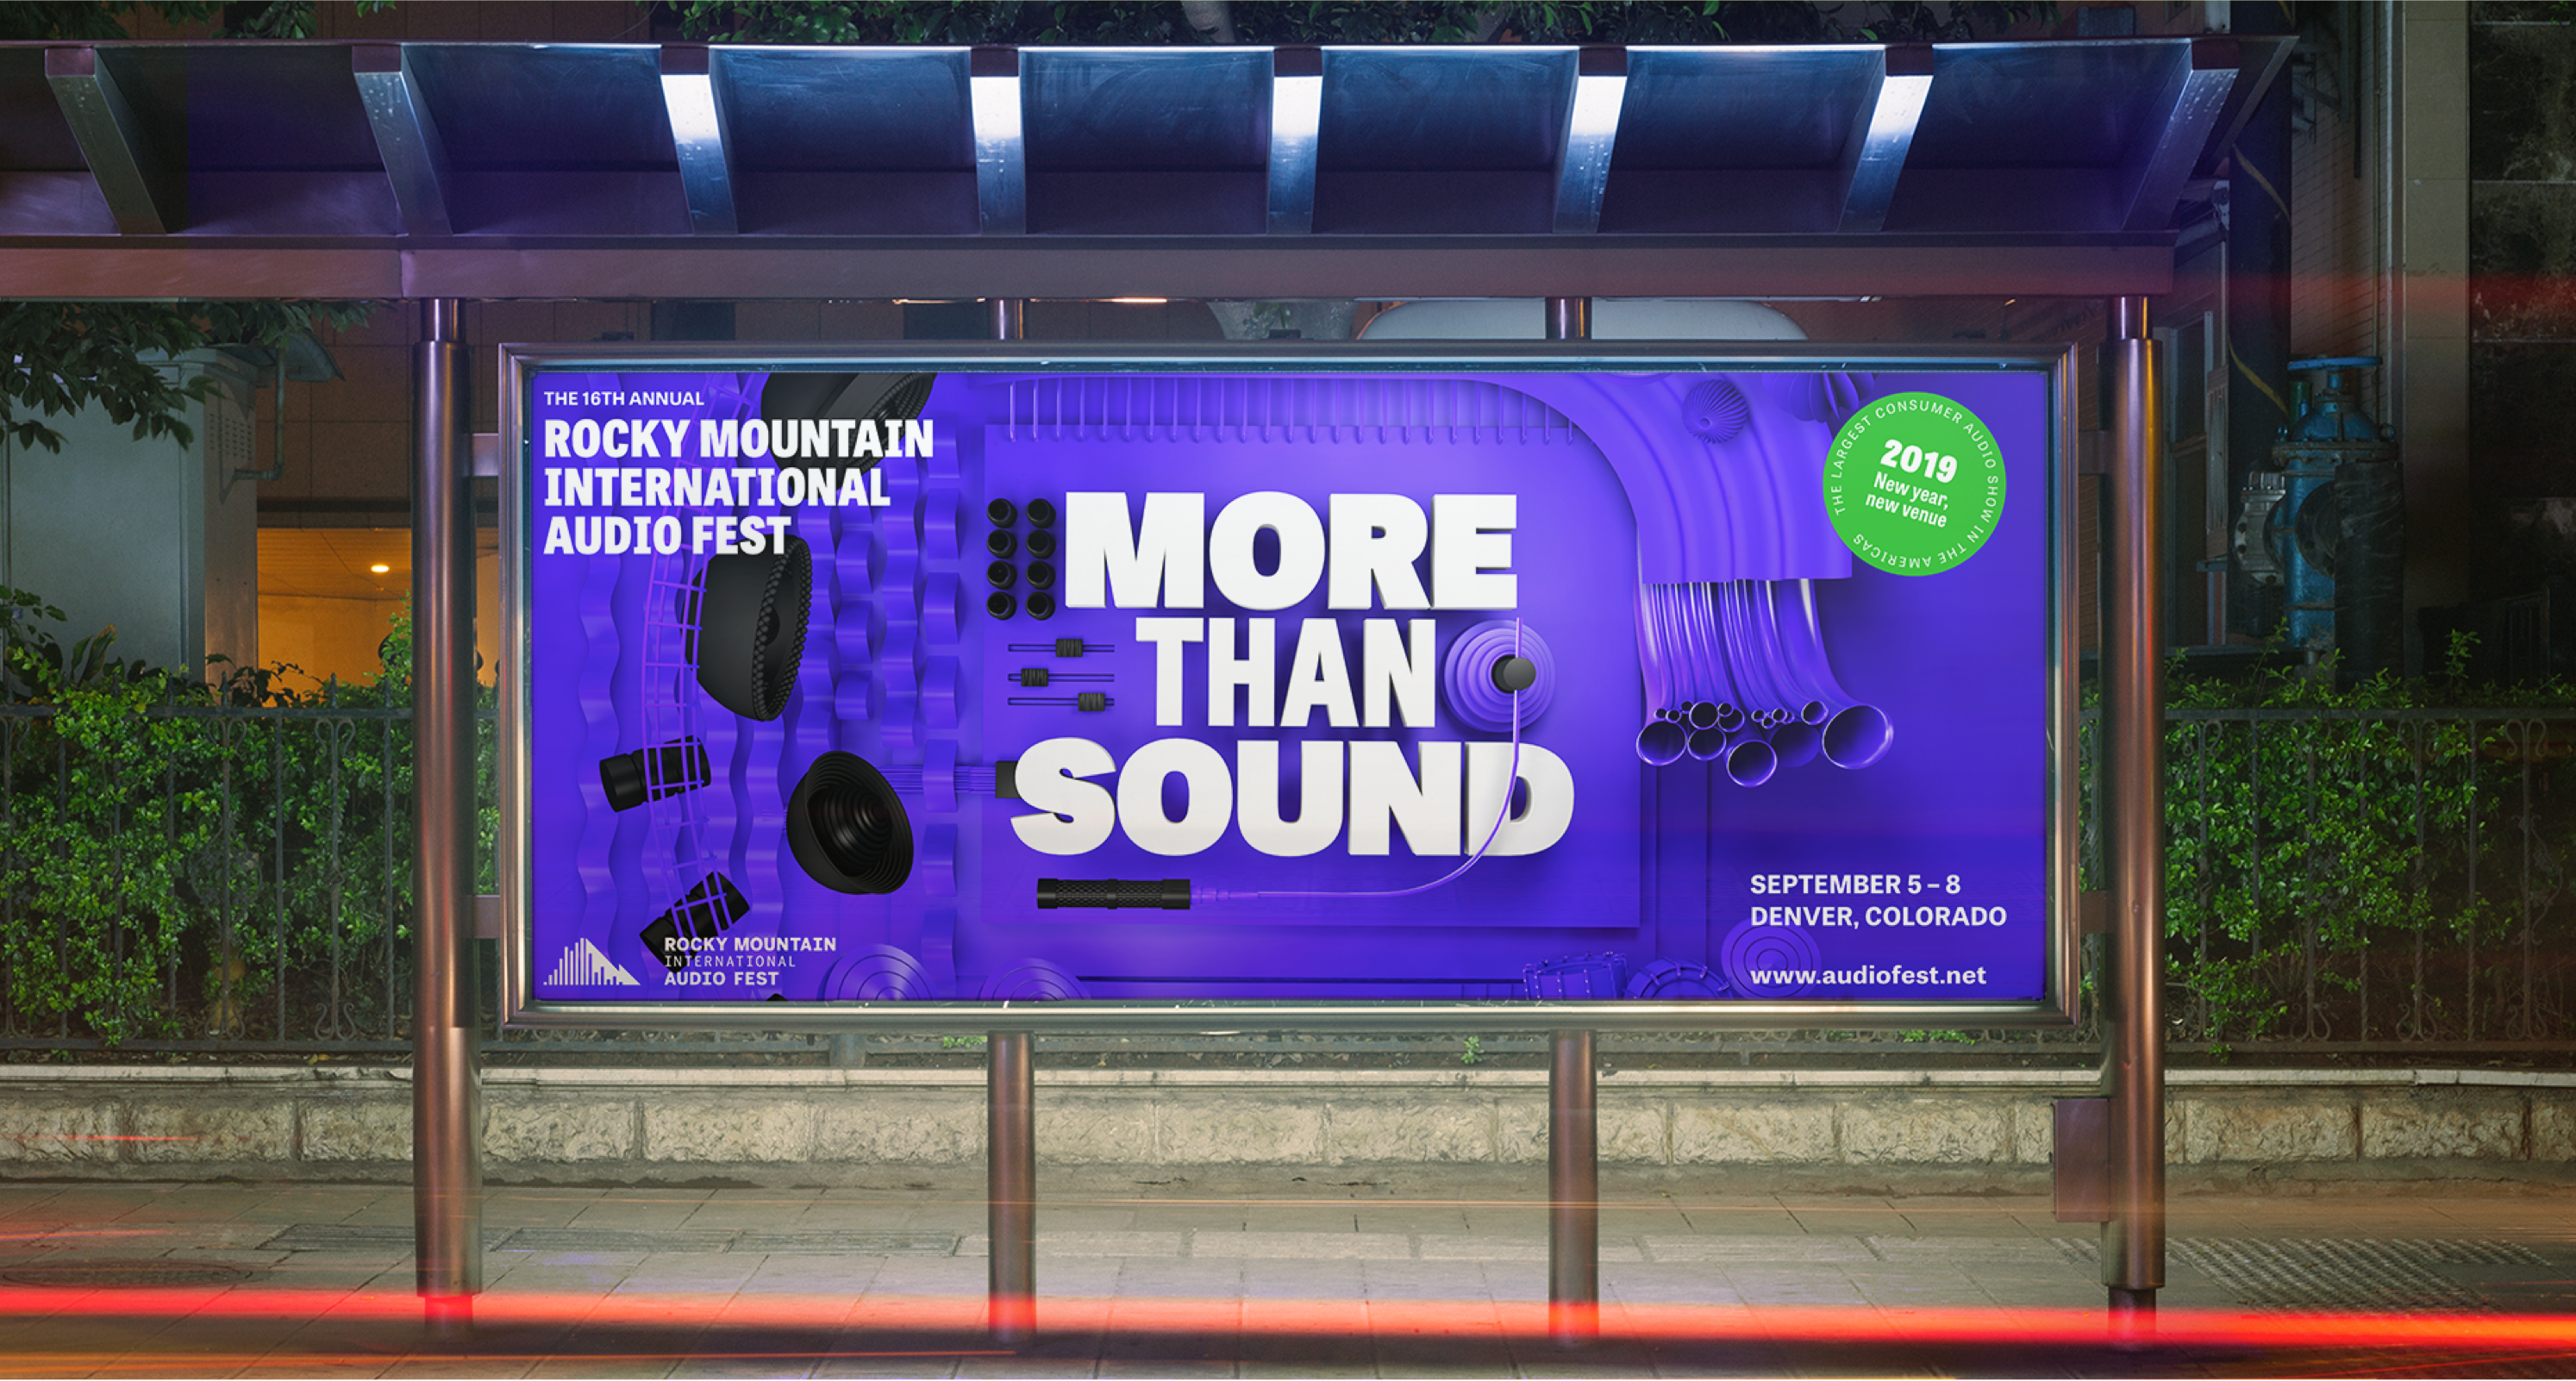 A photograph of the Rocky Mountain Audio Festival "More than Sound" billboard